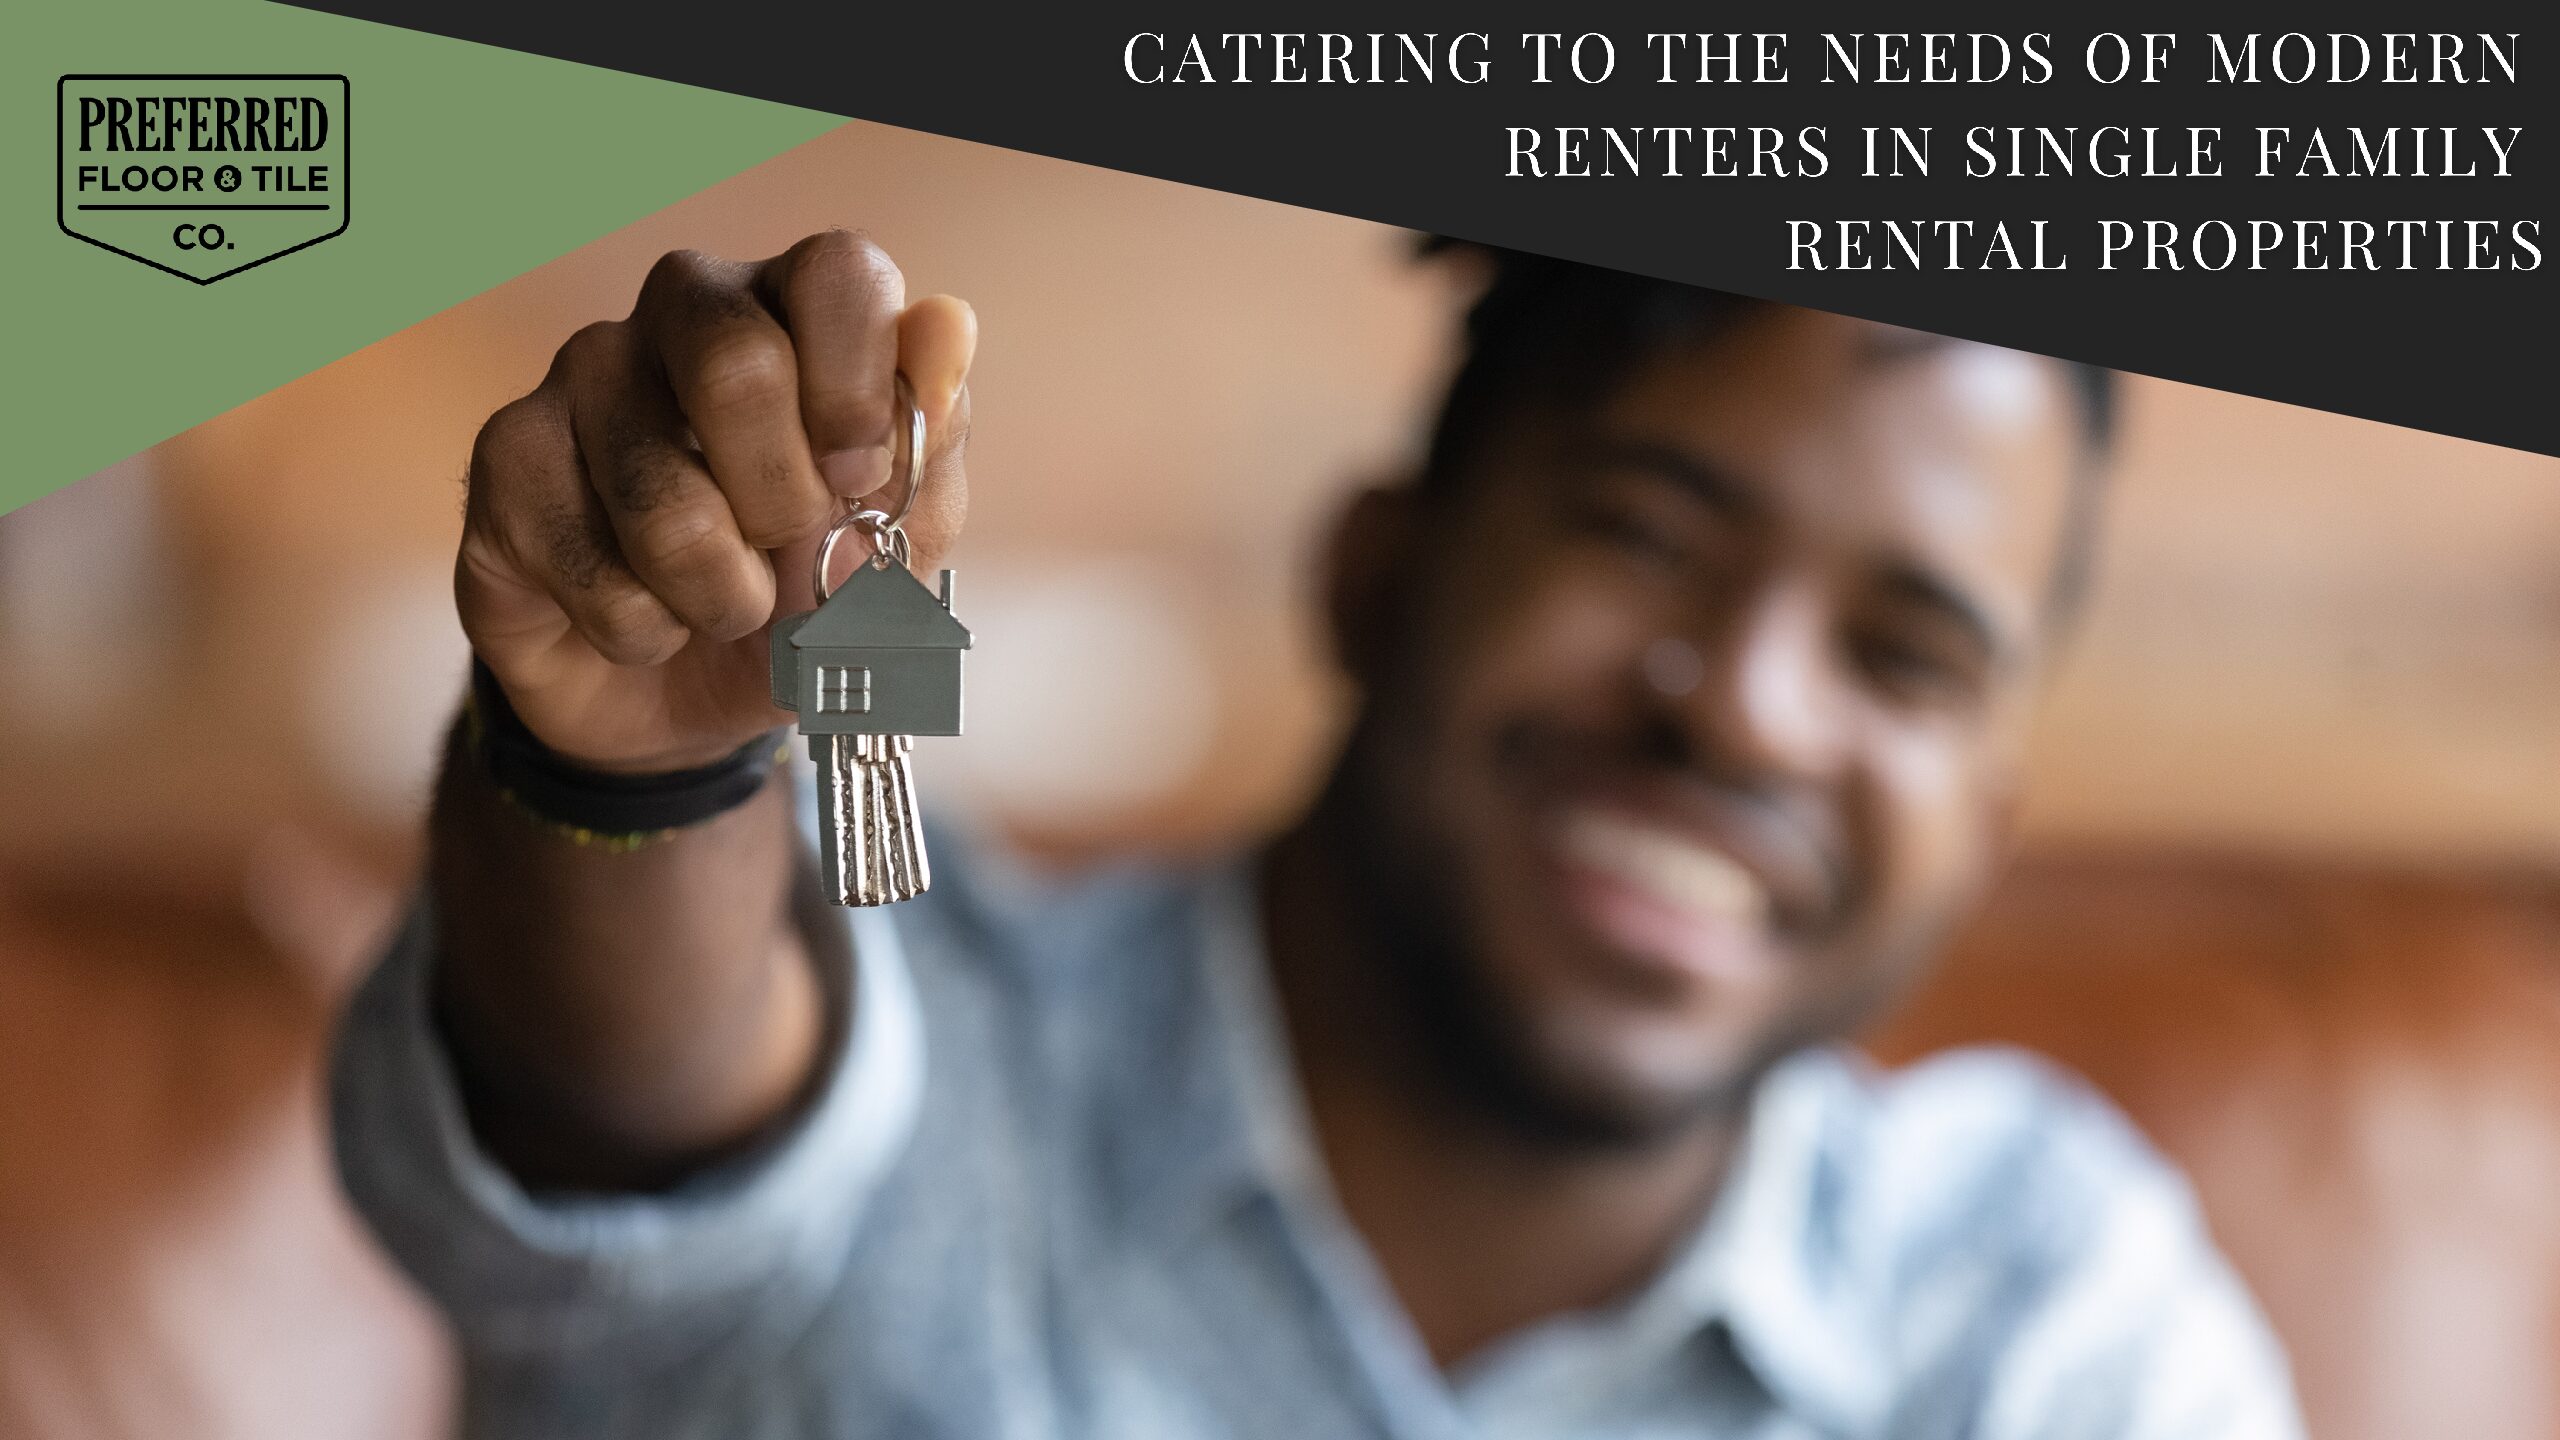 Catering to the Needs of Modern Renters in Single Family Rental Properties